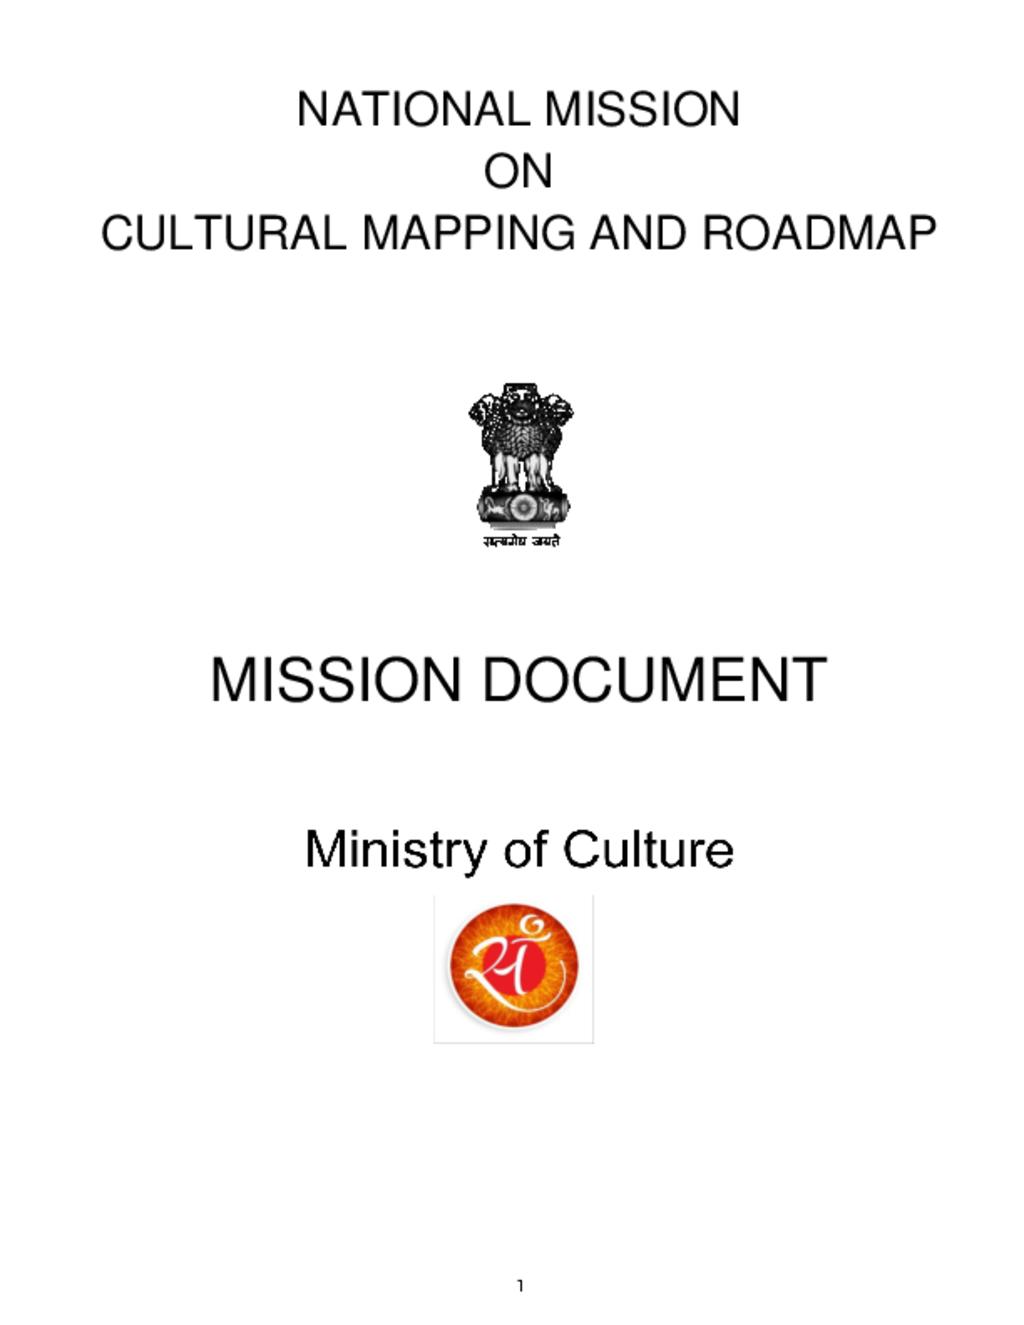 National Mission on Culture